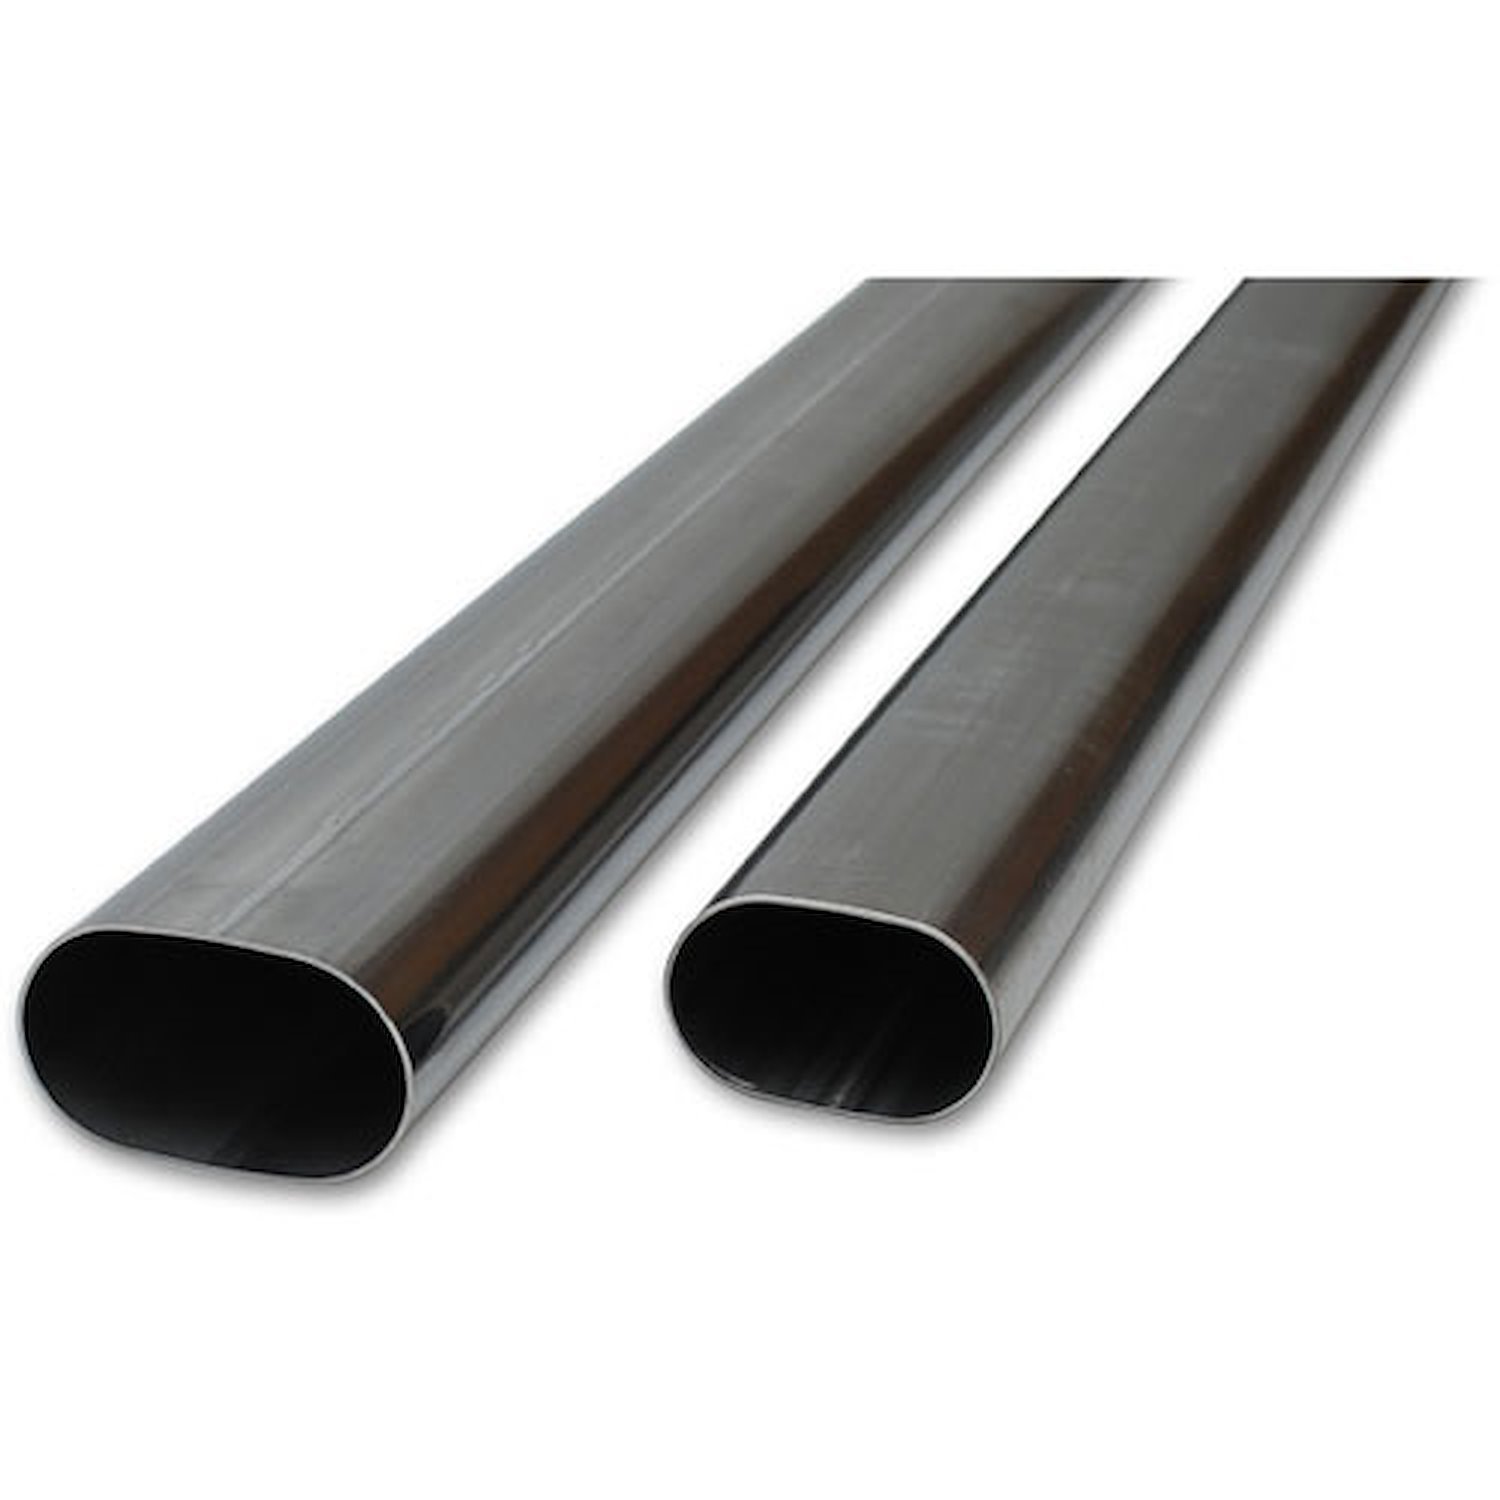 Stainless Steel Straight Oval Tubing 3" Nominal Oval